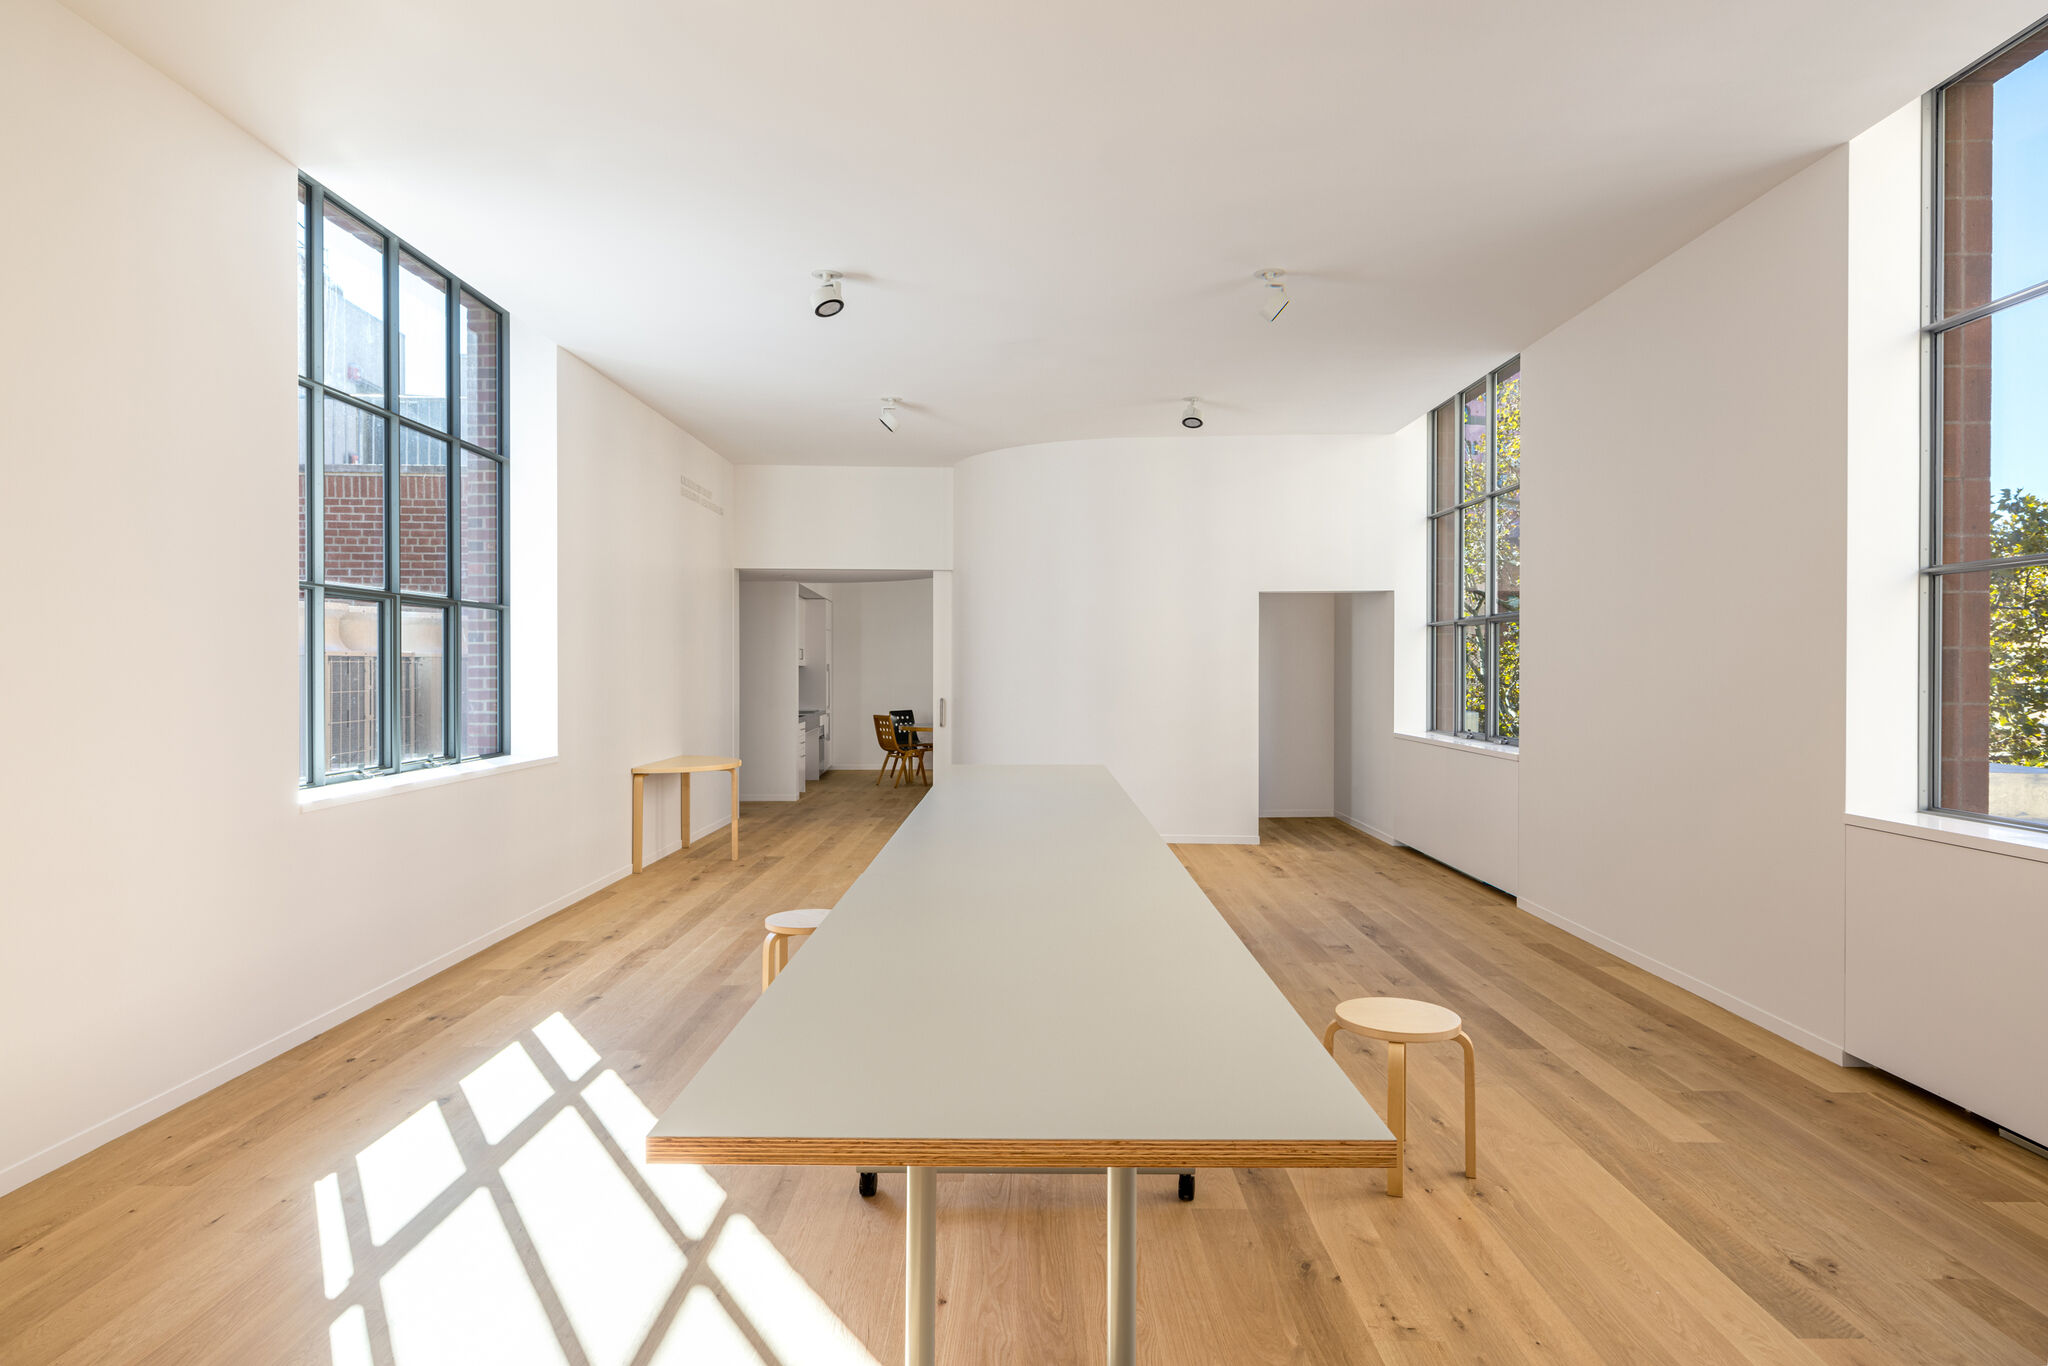 A long table in a bright room with wood floors. 